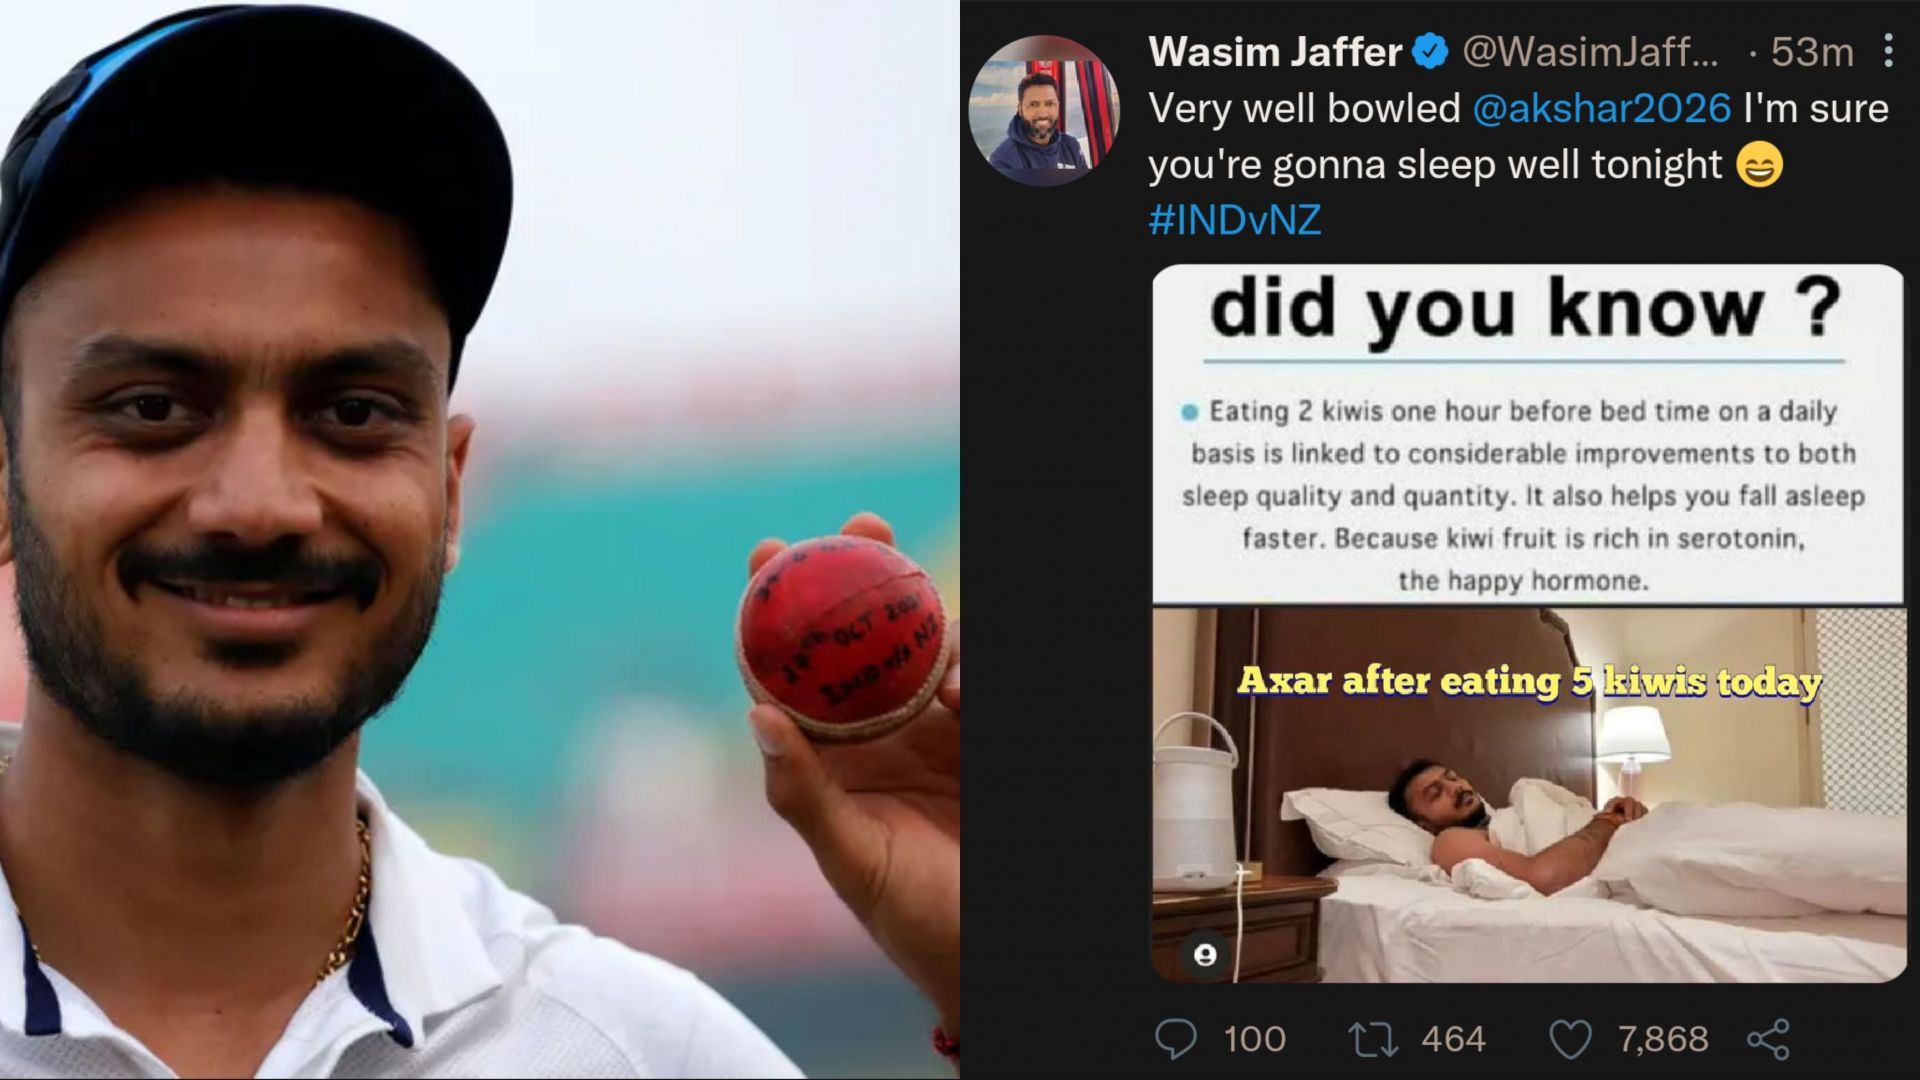 Wasim Jaffer posted a hilarious meme to praise Axar Patel for his performance on Day 3 of the India vs New Zealand Test (Image Source: BCCI/Twitter)